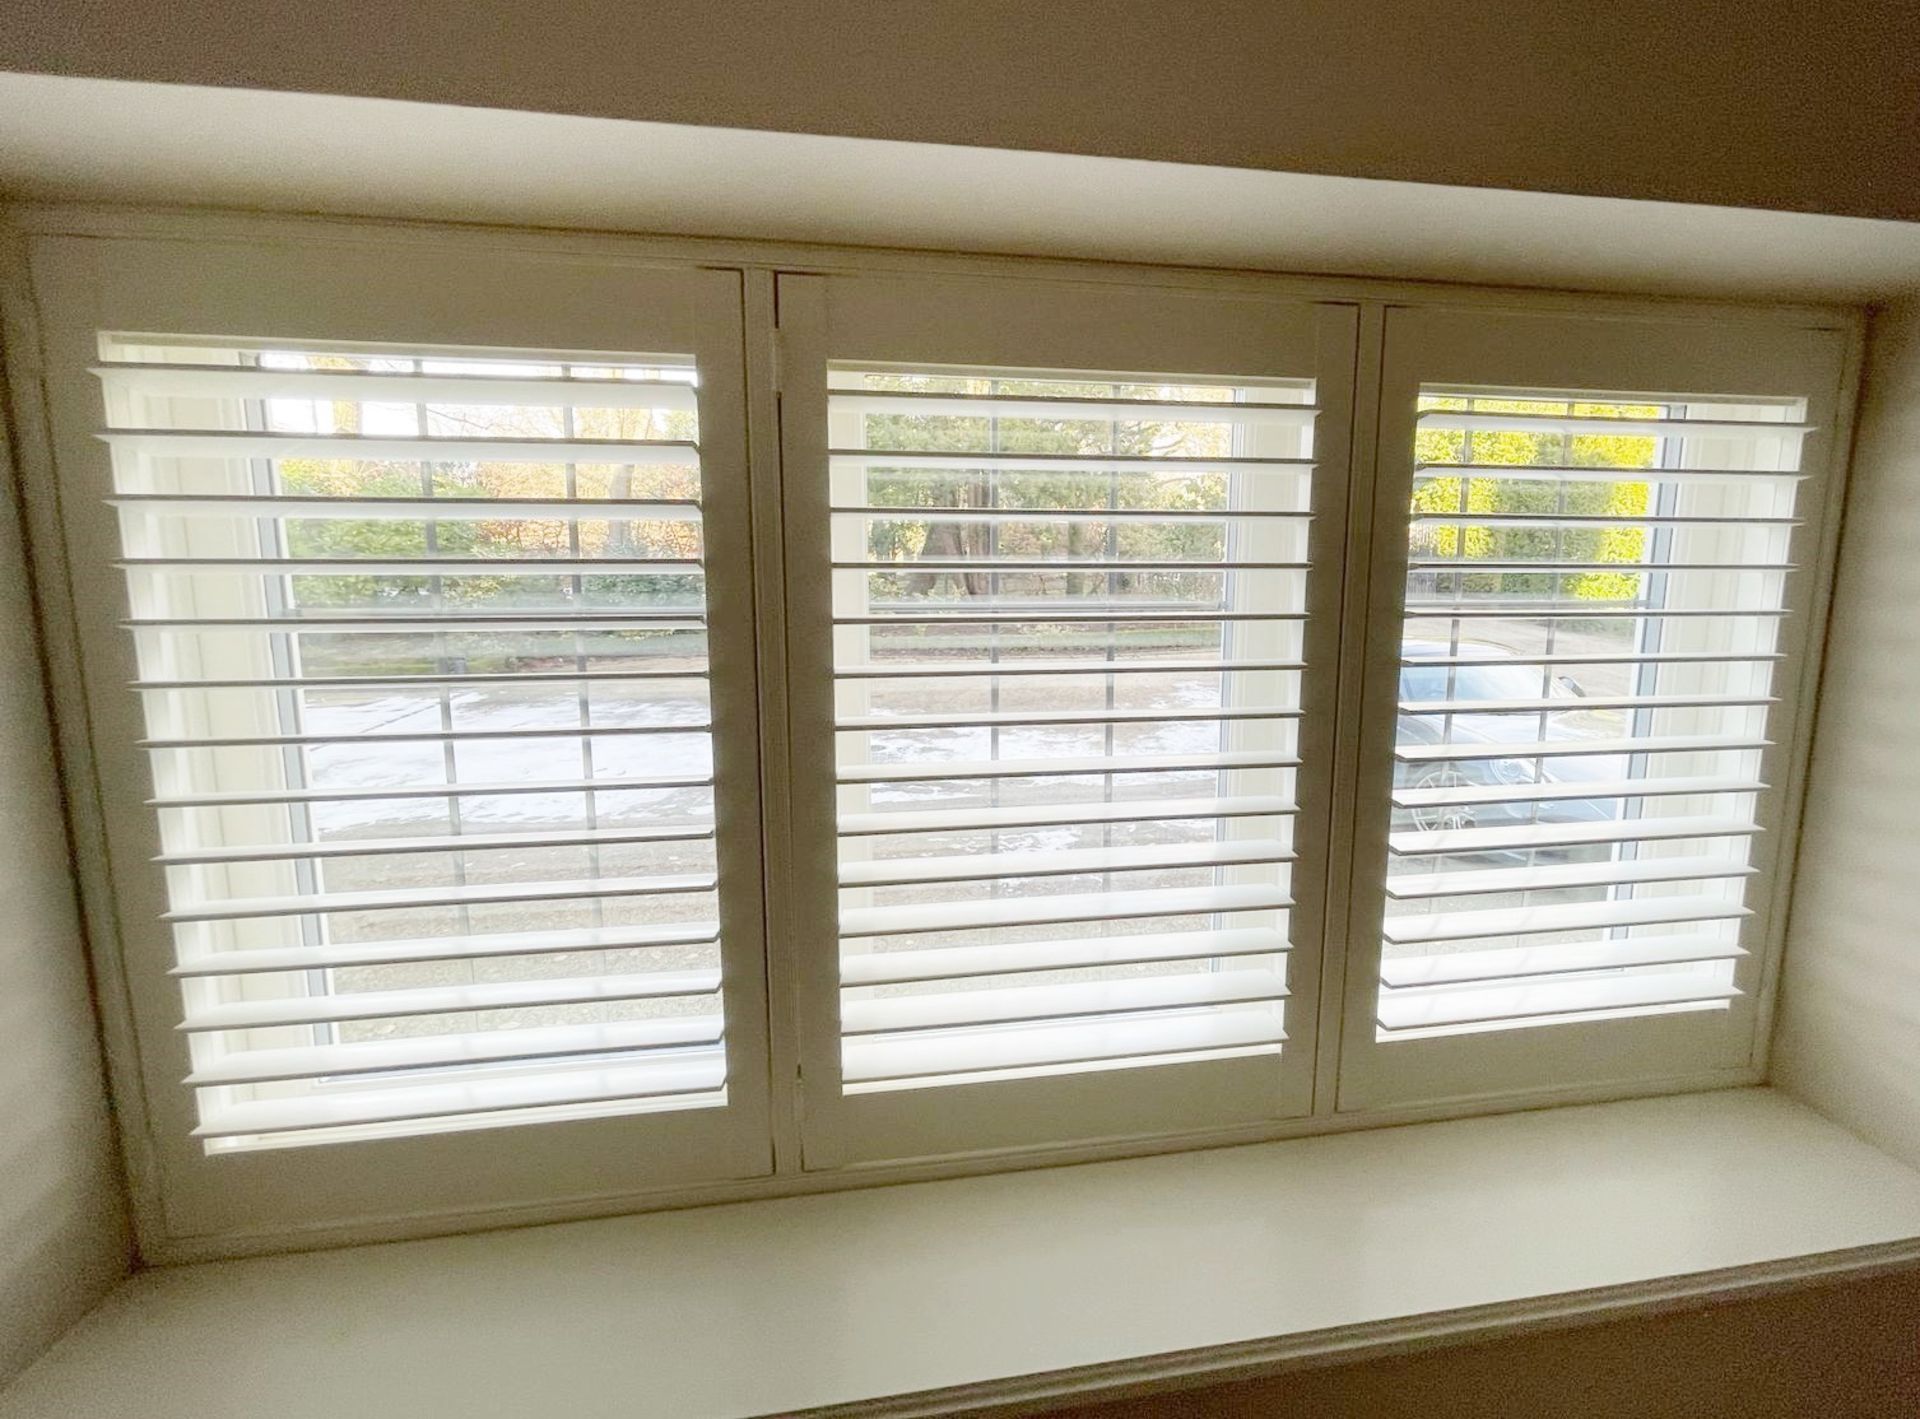 1 x Hardwood Timber Double Glazed Leaded 3-Pane Window Frame fitted with Shutter Blinds - Image 4 of 15